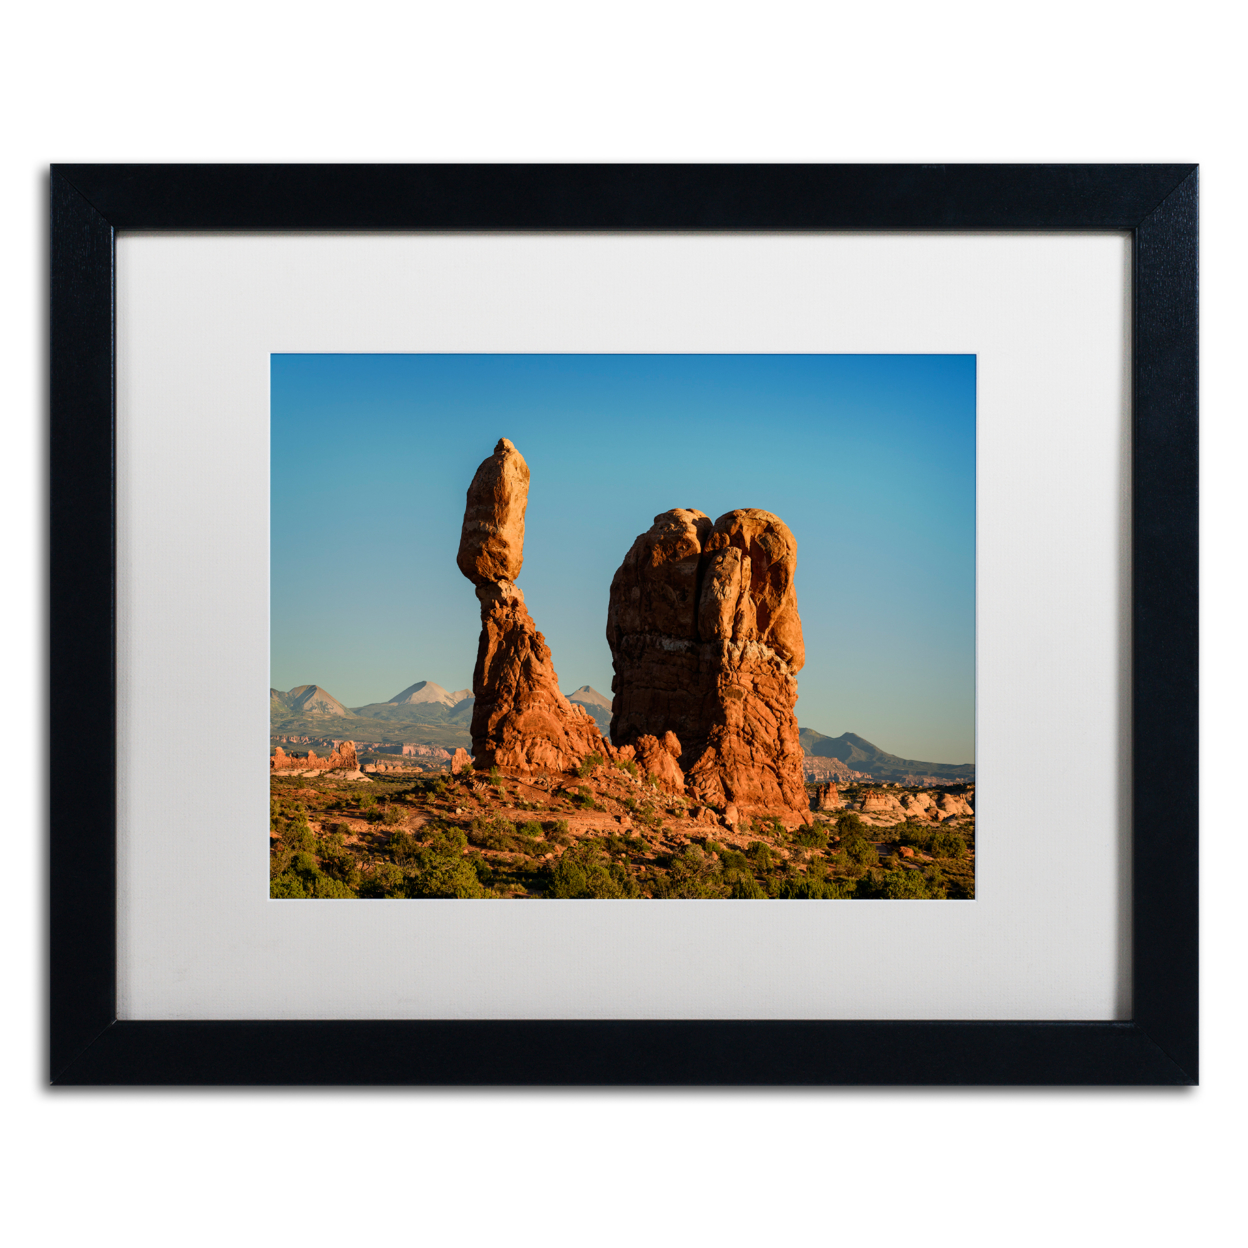 Michael Blanchette Photography 'Balanced Rock' Black Wooden Framed Art 18 X 22 Inches